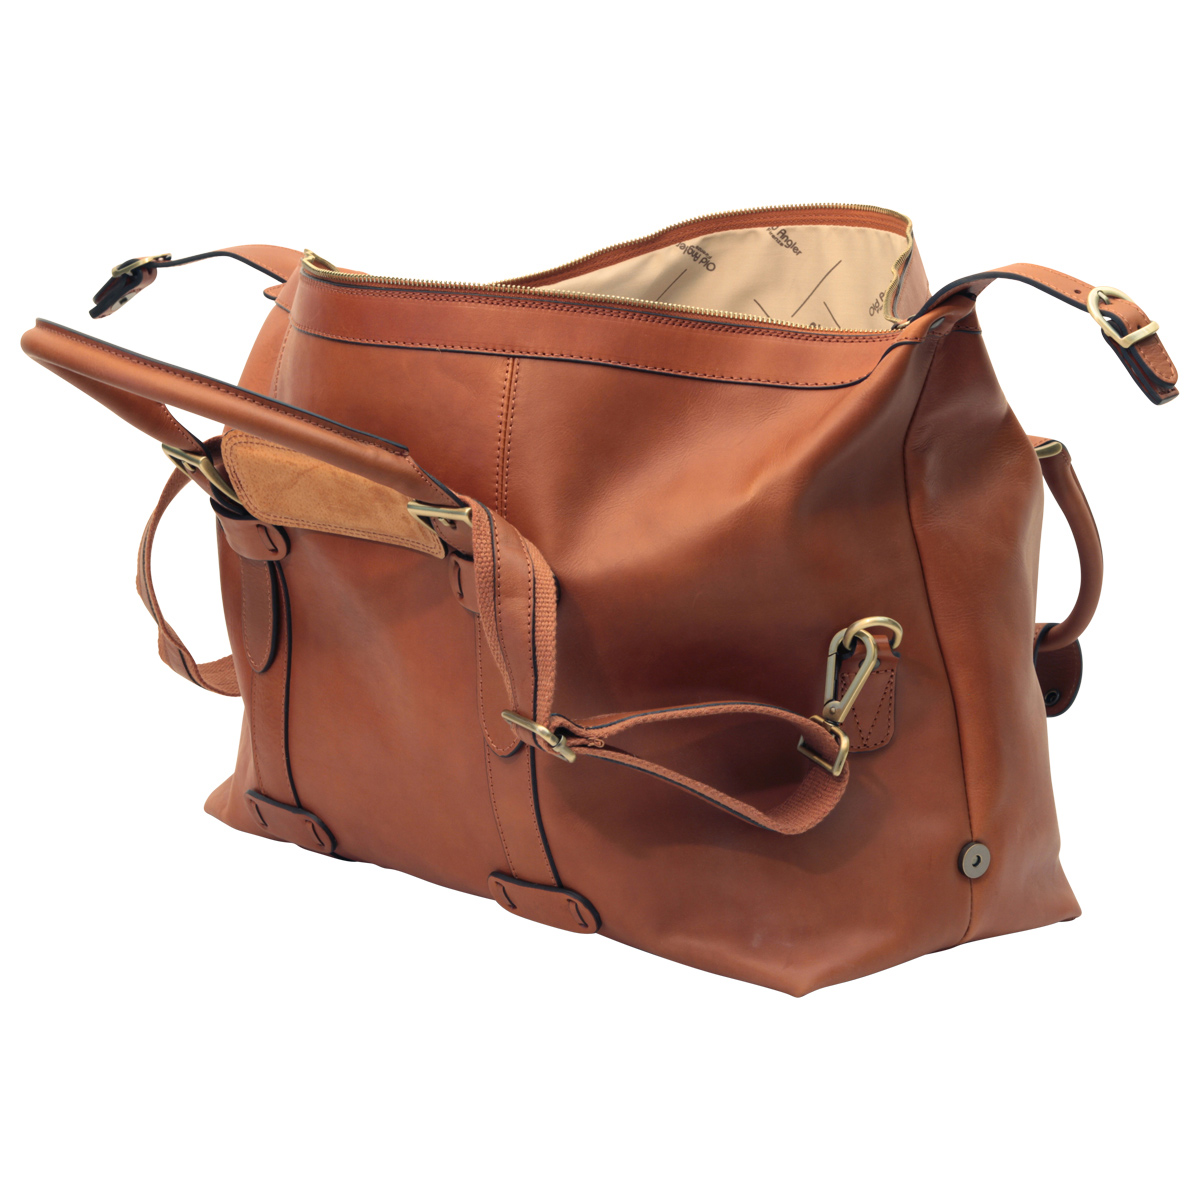 Cowhide leather Travel Bag - Brown Colonial | 410689CO | EURO | Old Angler Firenze